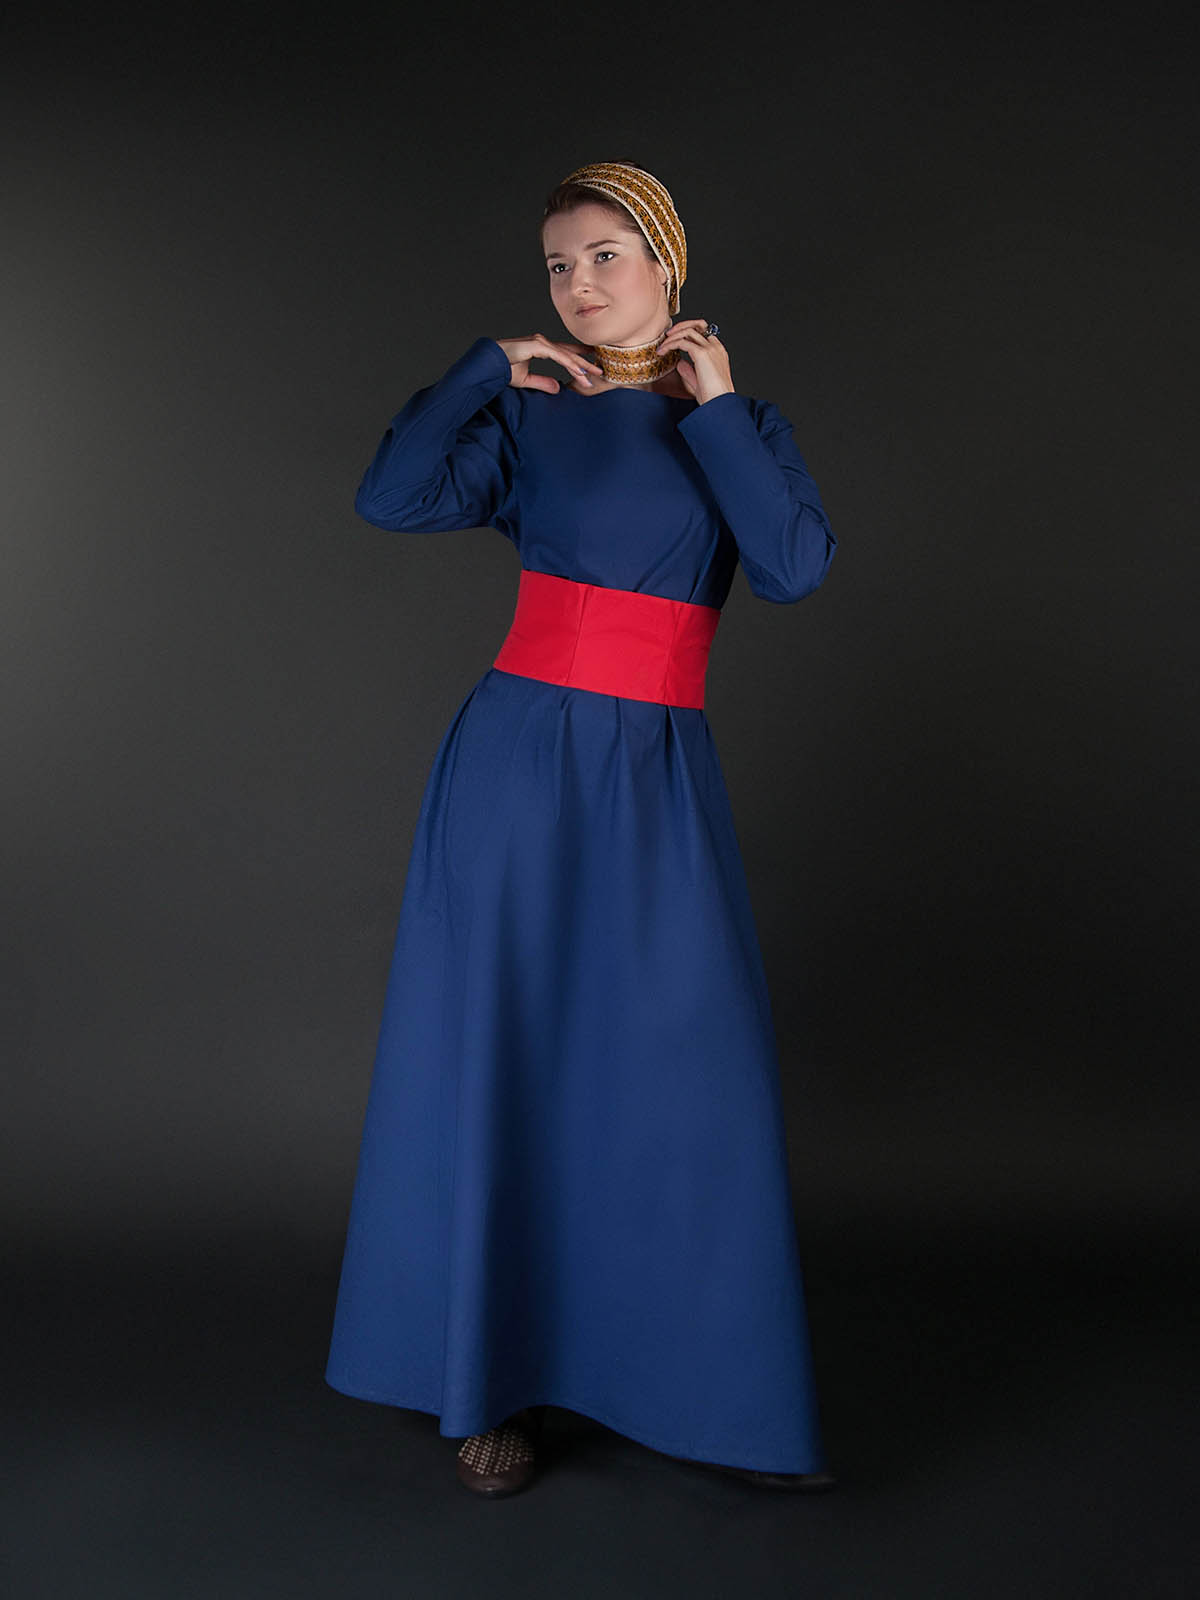 Medieval style dress with wide belt